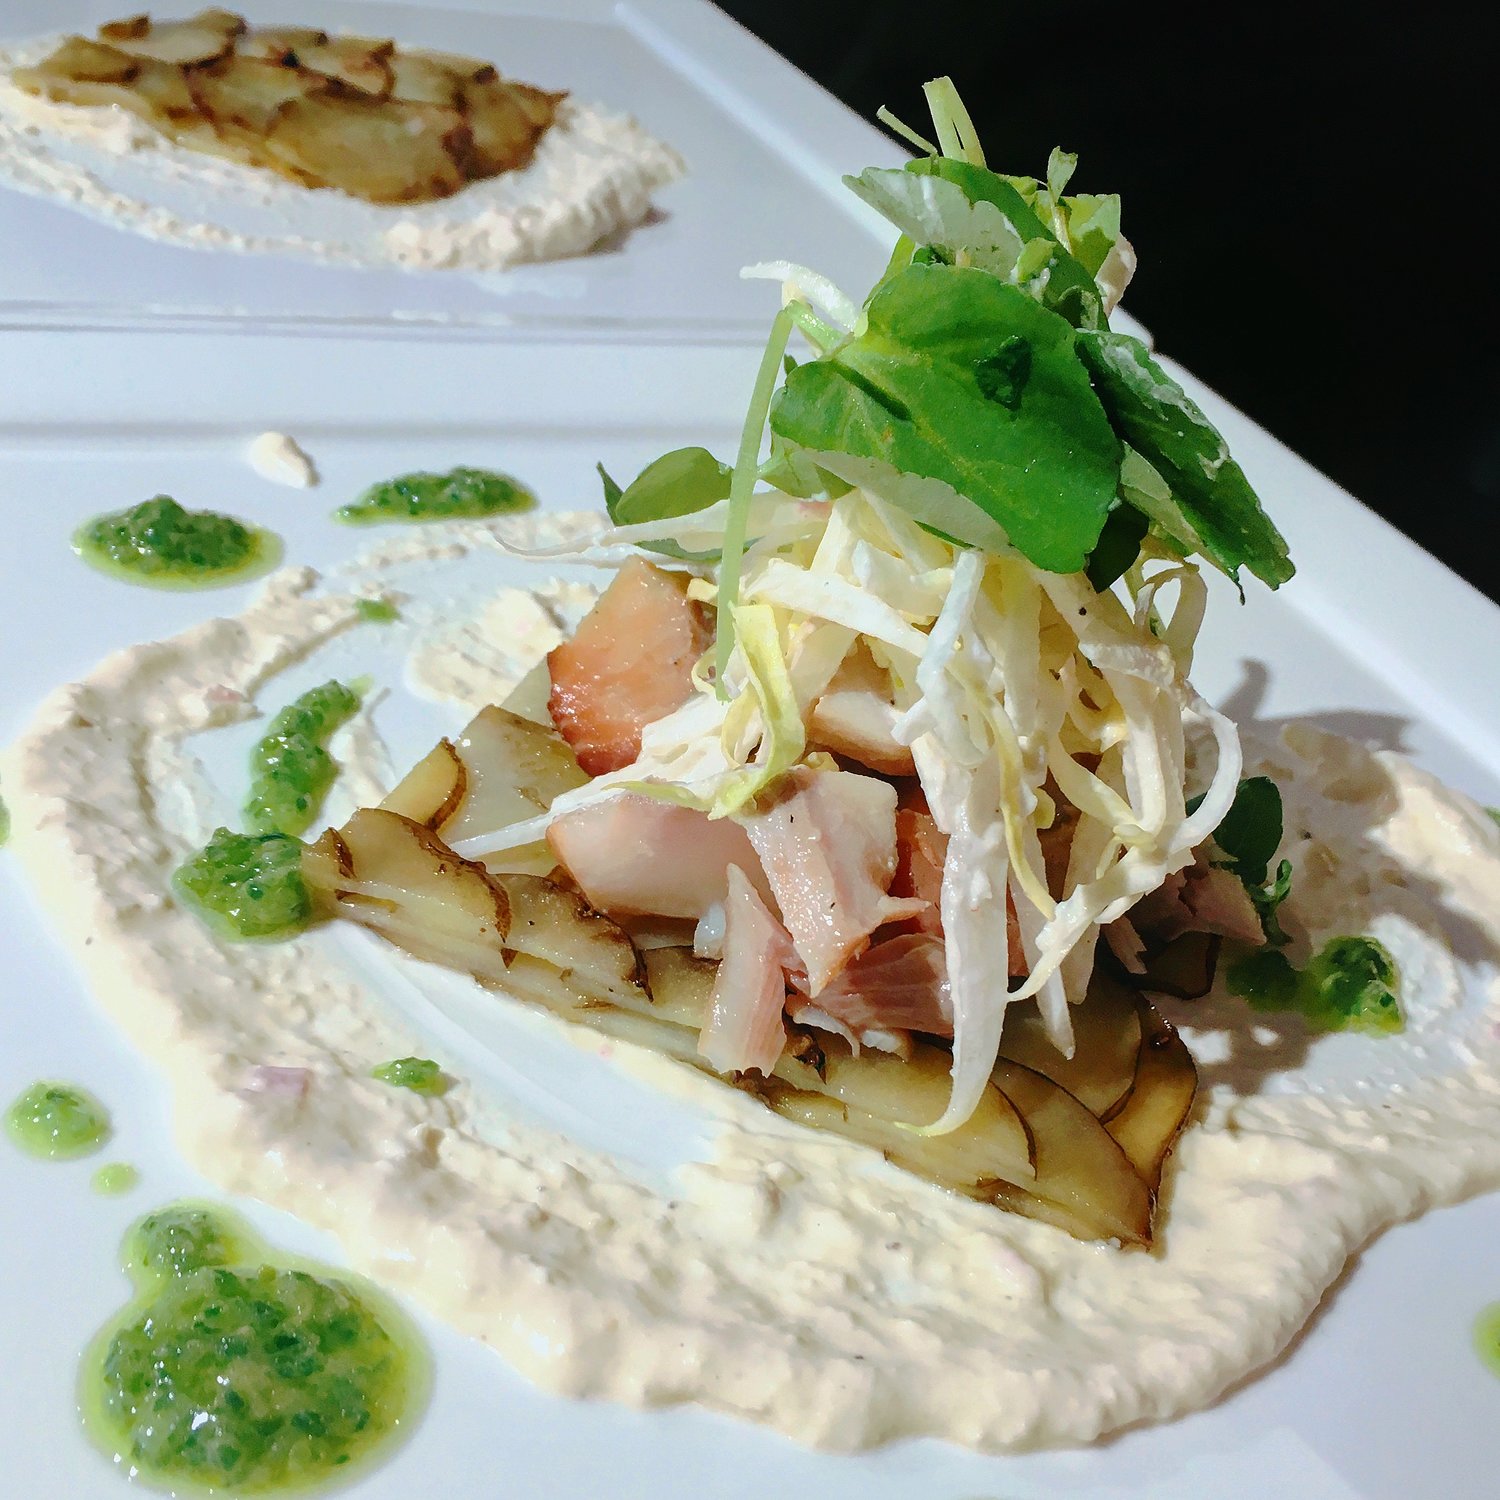 Smoked Trout, Endive & Potato Salad with Green Onion Oil and Horseradish Creme